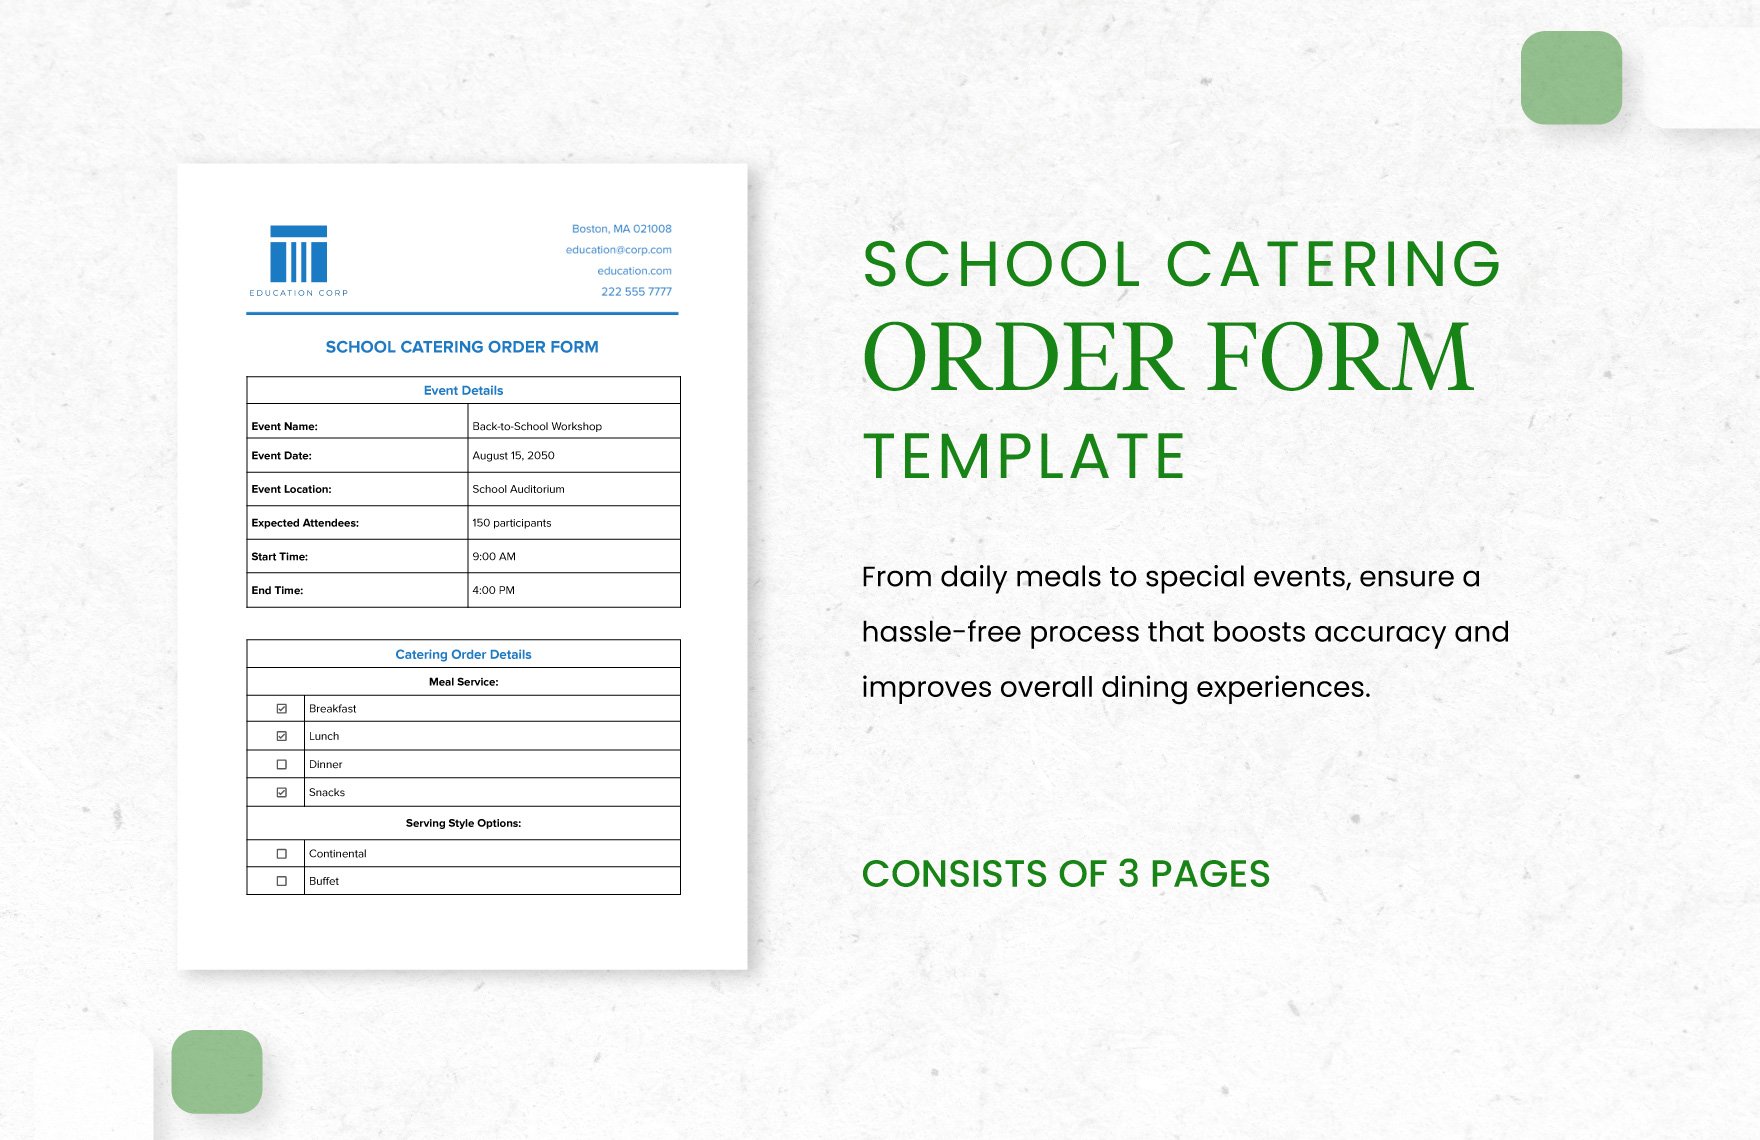 School Catering Order Form Template